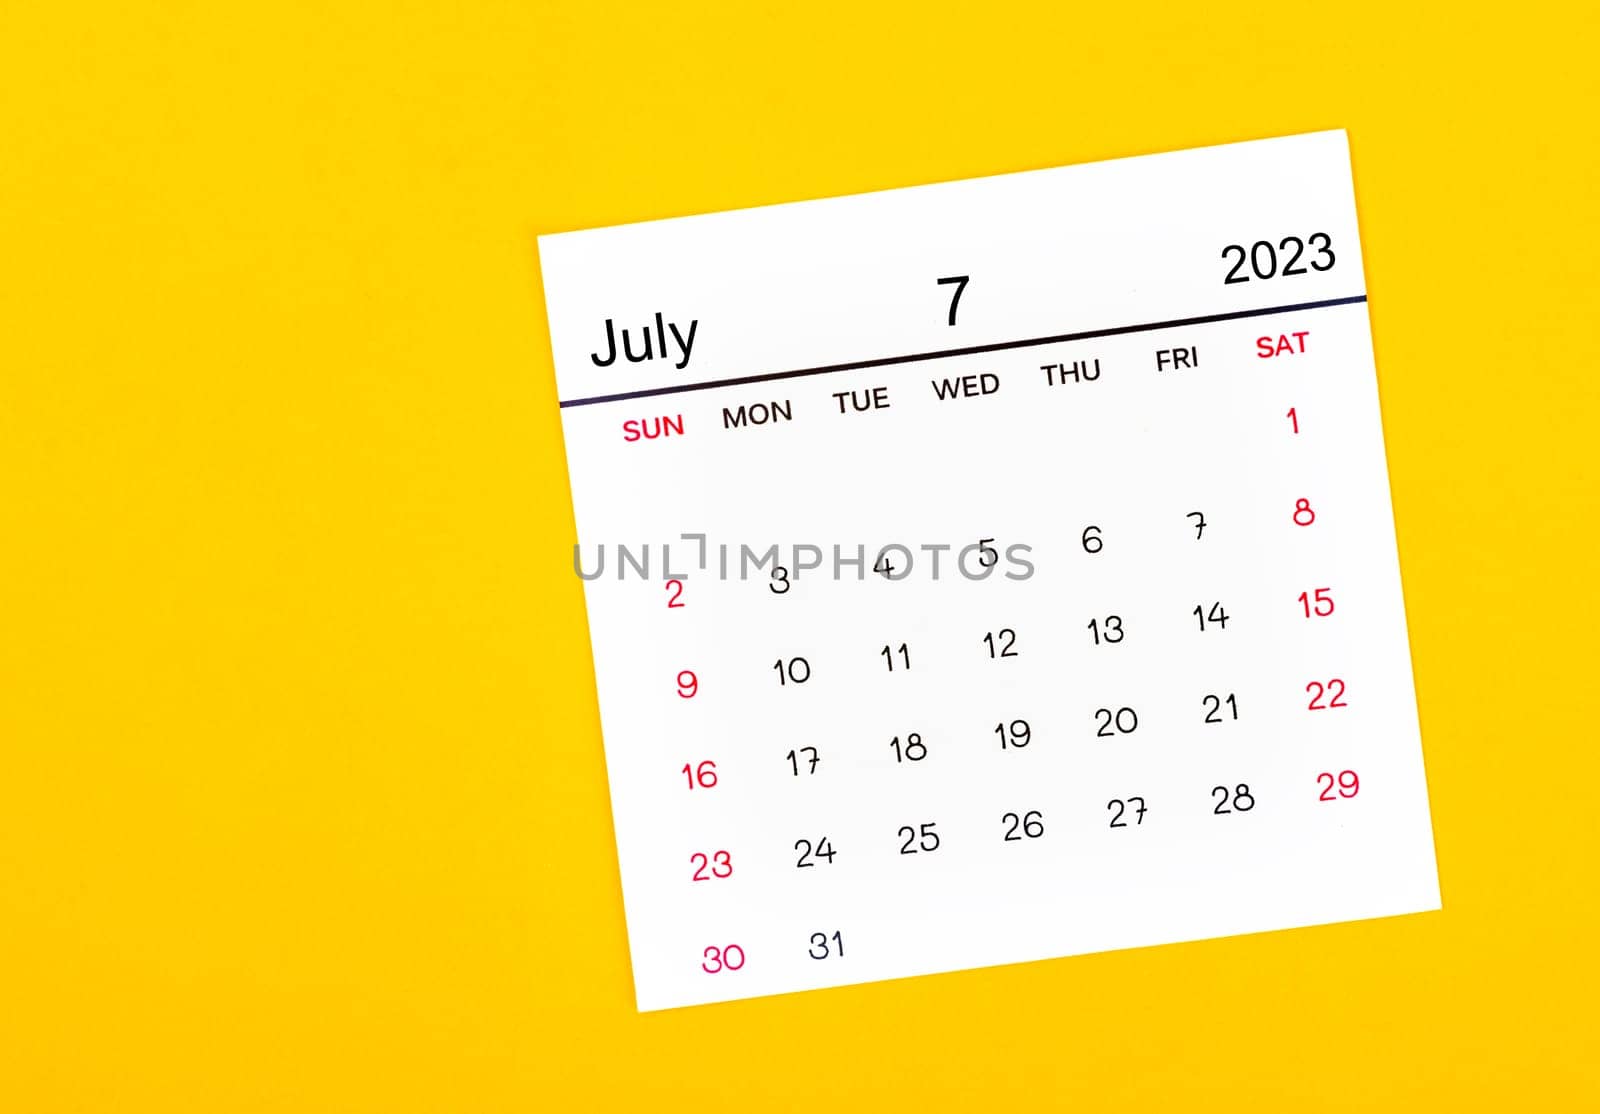 The July 2023 Monthly calendar for 2023 year on yellow background. by Gamjai